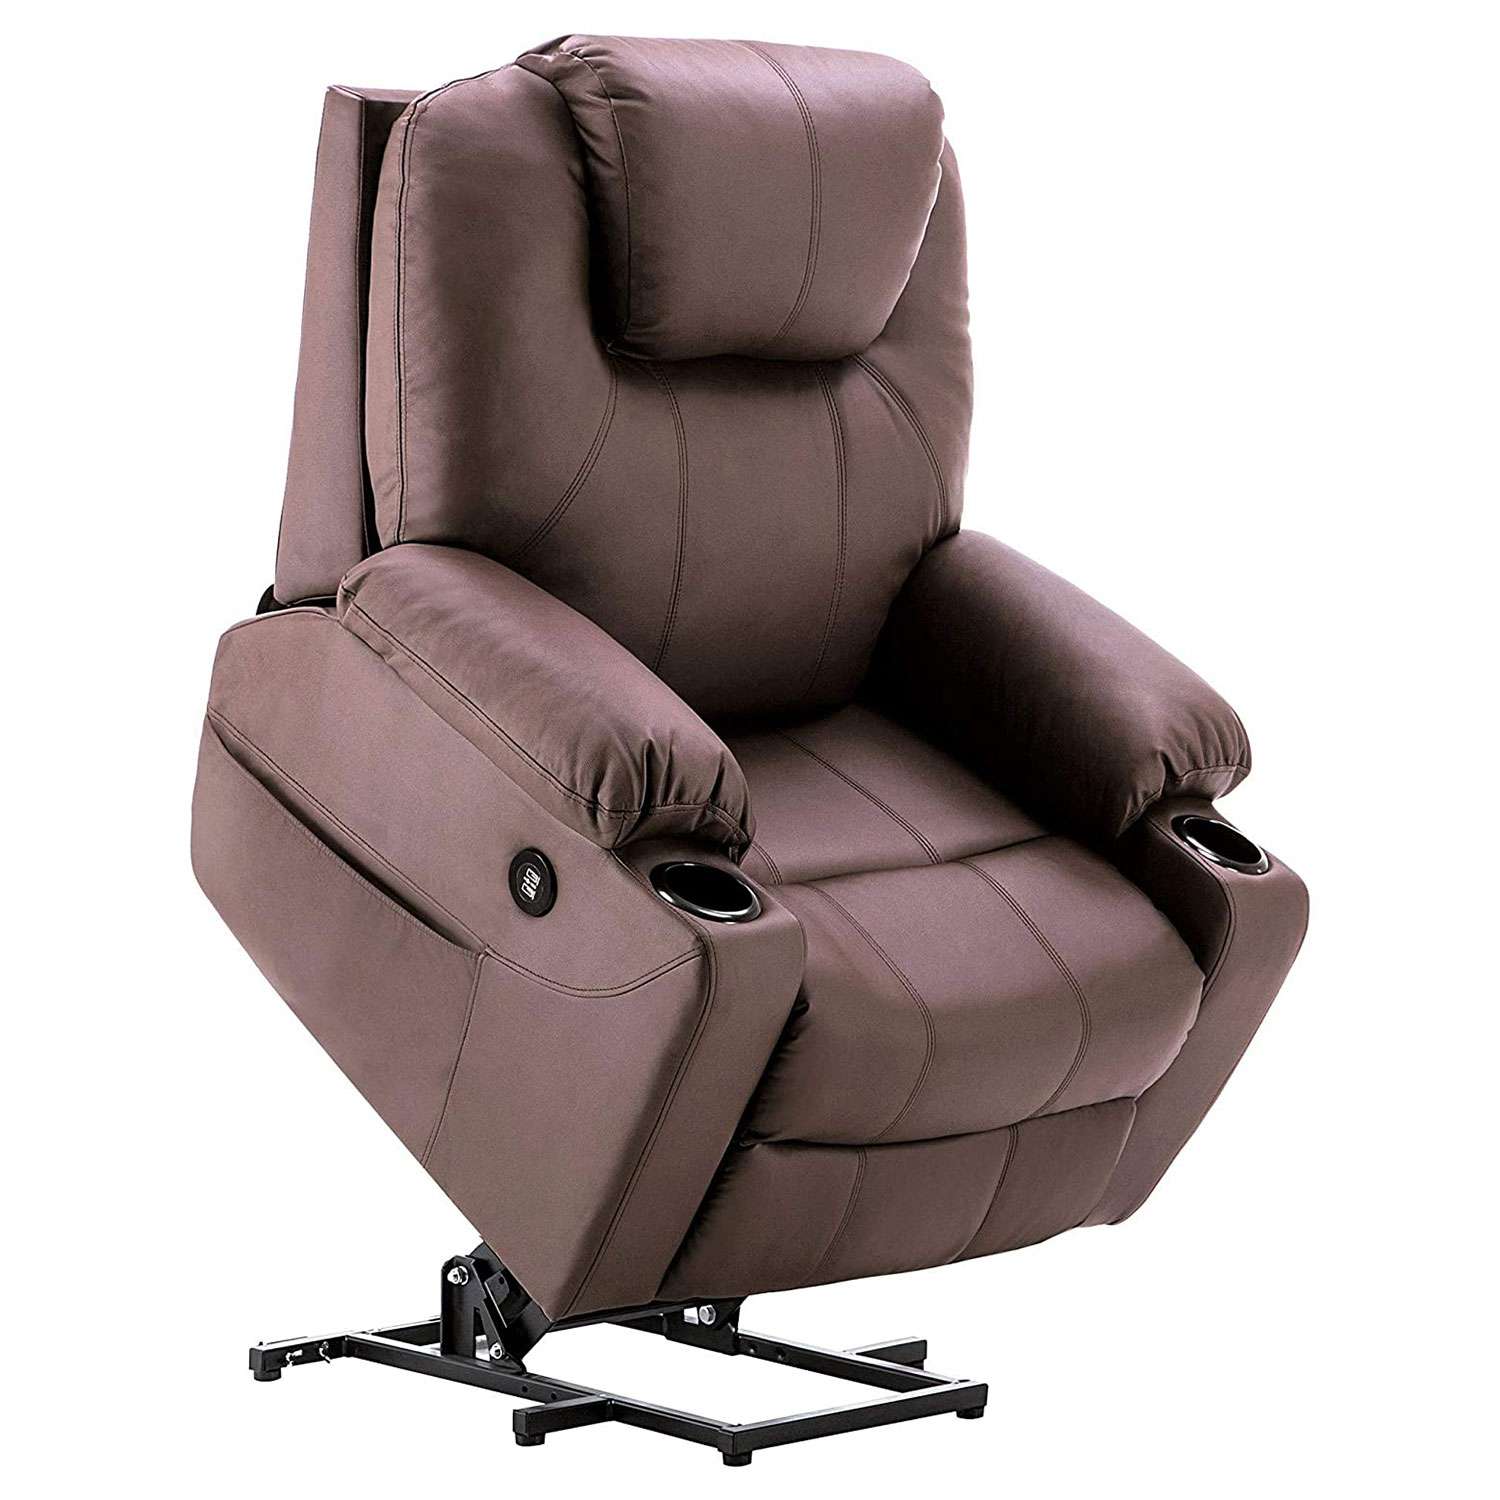 Mcombo Electric Power Lift Recliner Chair Sofa with Massage and Heat